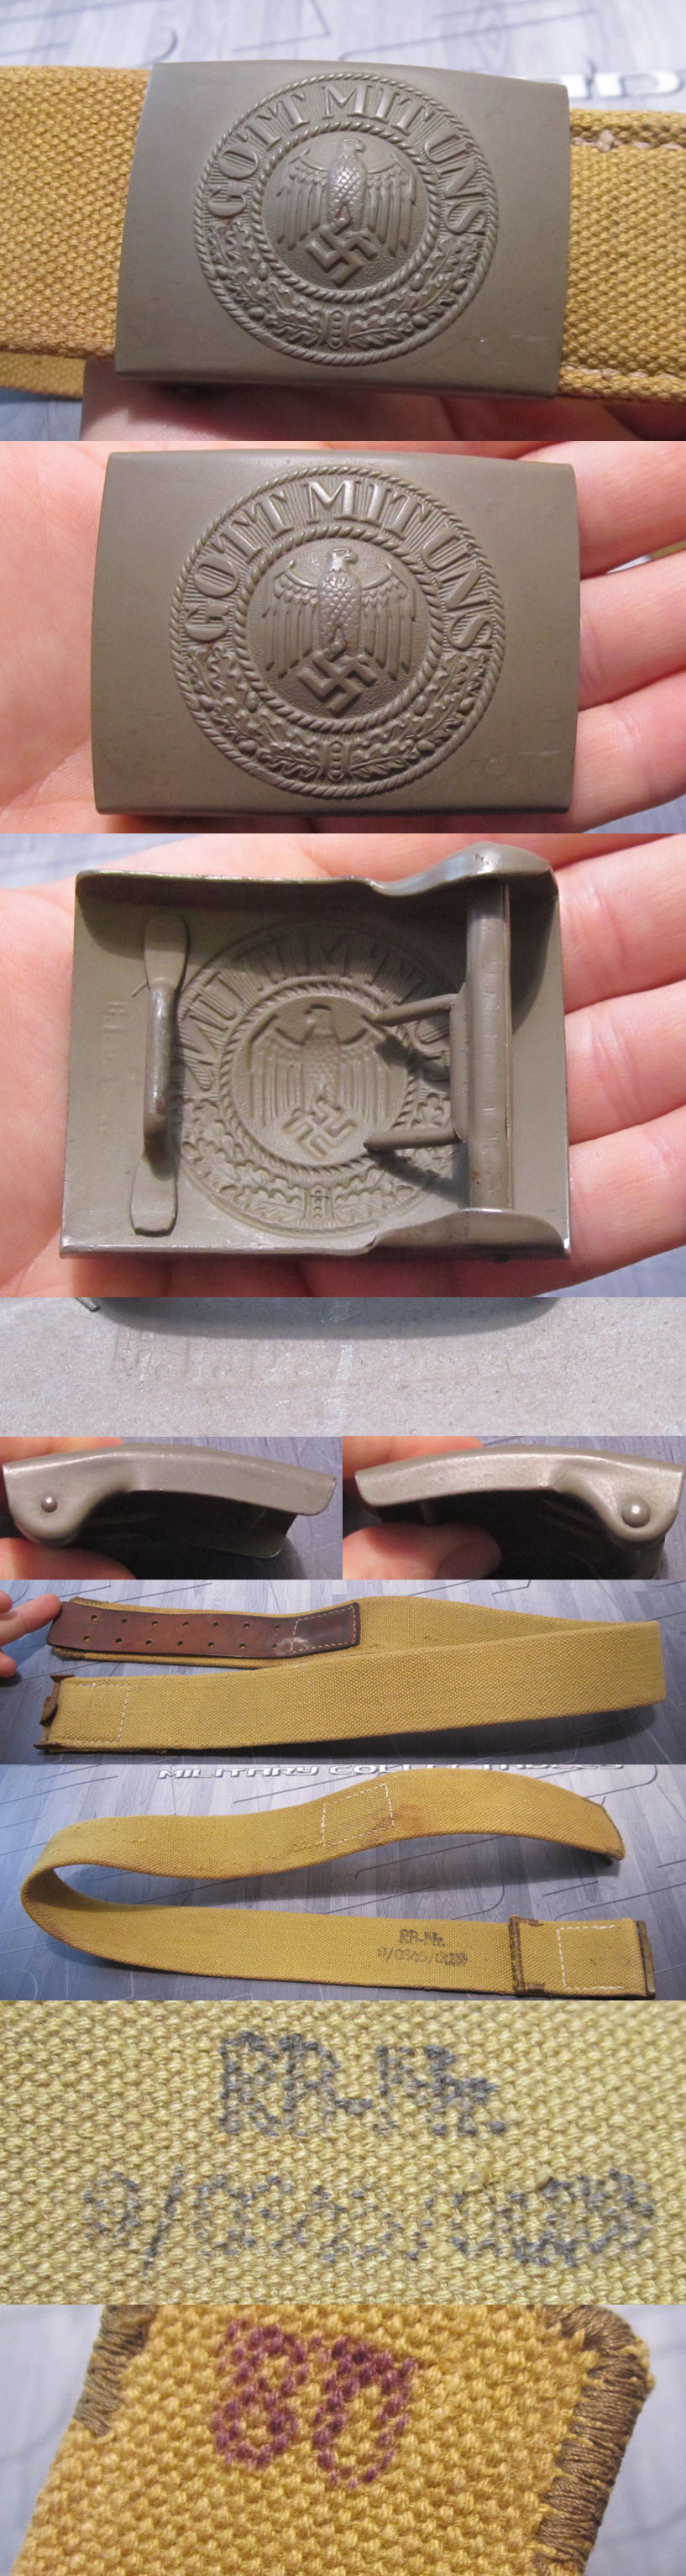 Tropical Army Belt and Buckle 1942